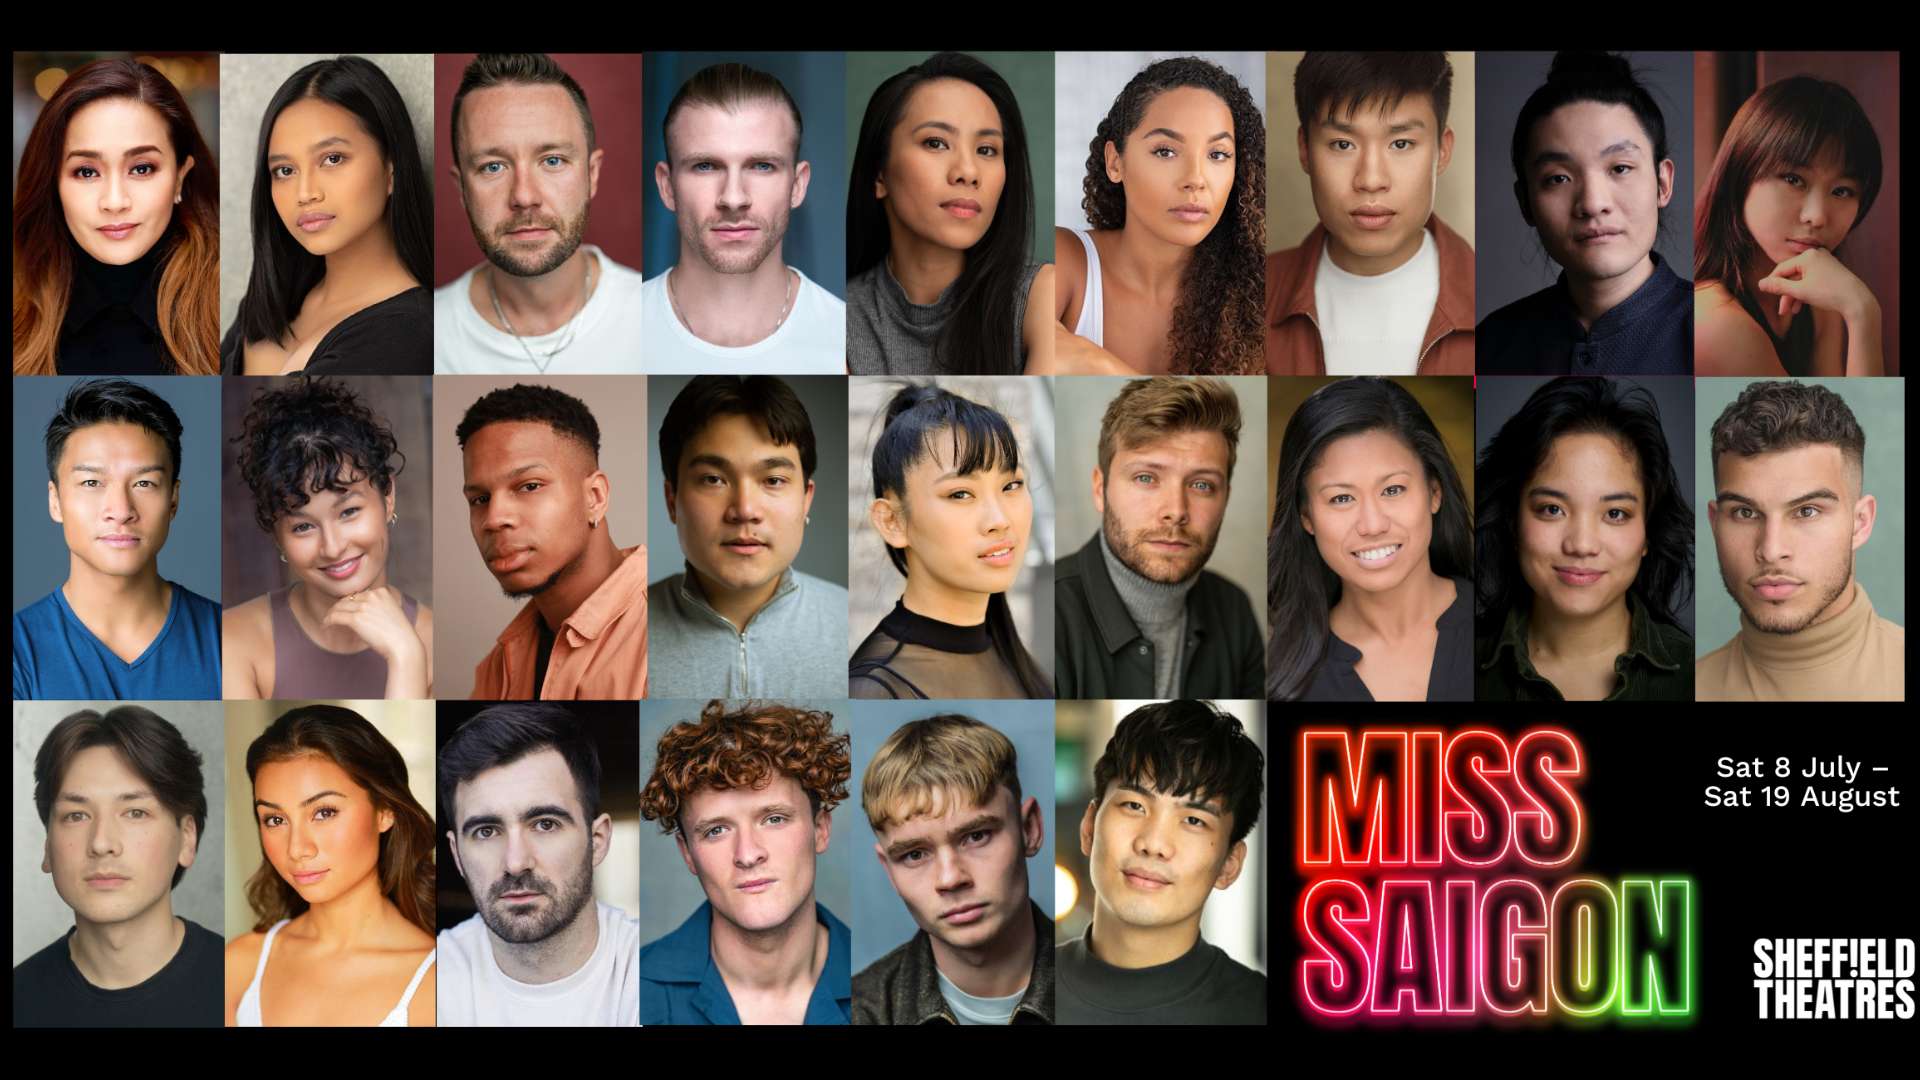 Sheffield Theatres Announce Full Cast And Creative Team For New Reimagined Production of ‘Miss Saigon’